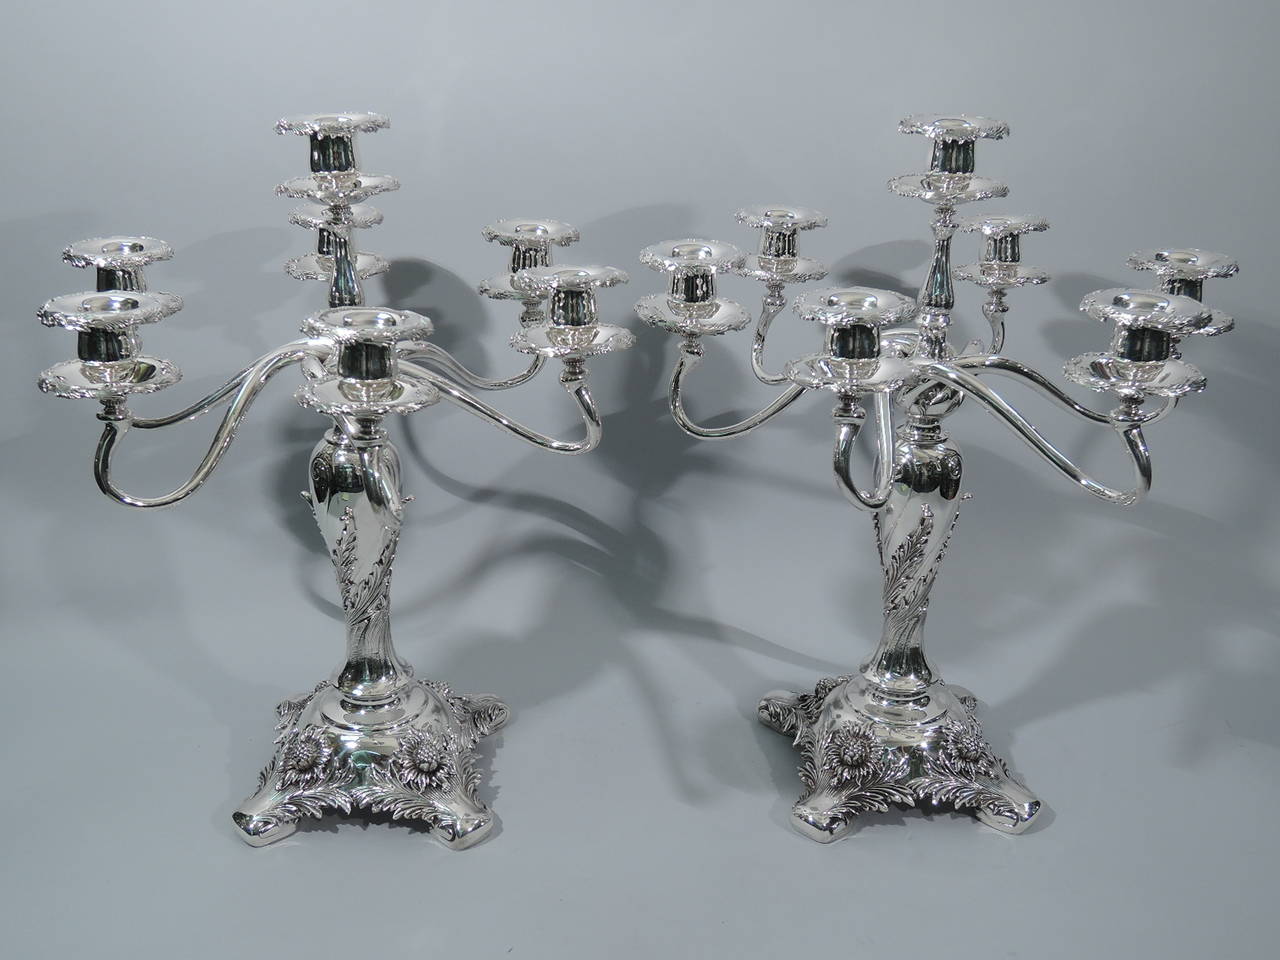 Pair of seven-light sterling silver candelabra in Chrysanthemum pattern. Made by Tiffany & Co. in New York, ca 1910. 

Each: baluster shaft on raised square foot resting on flat volute corner supports. Single central light surrounded by six scrolled